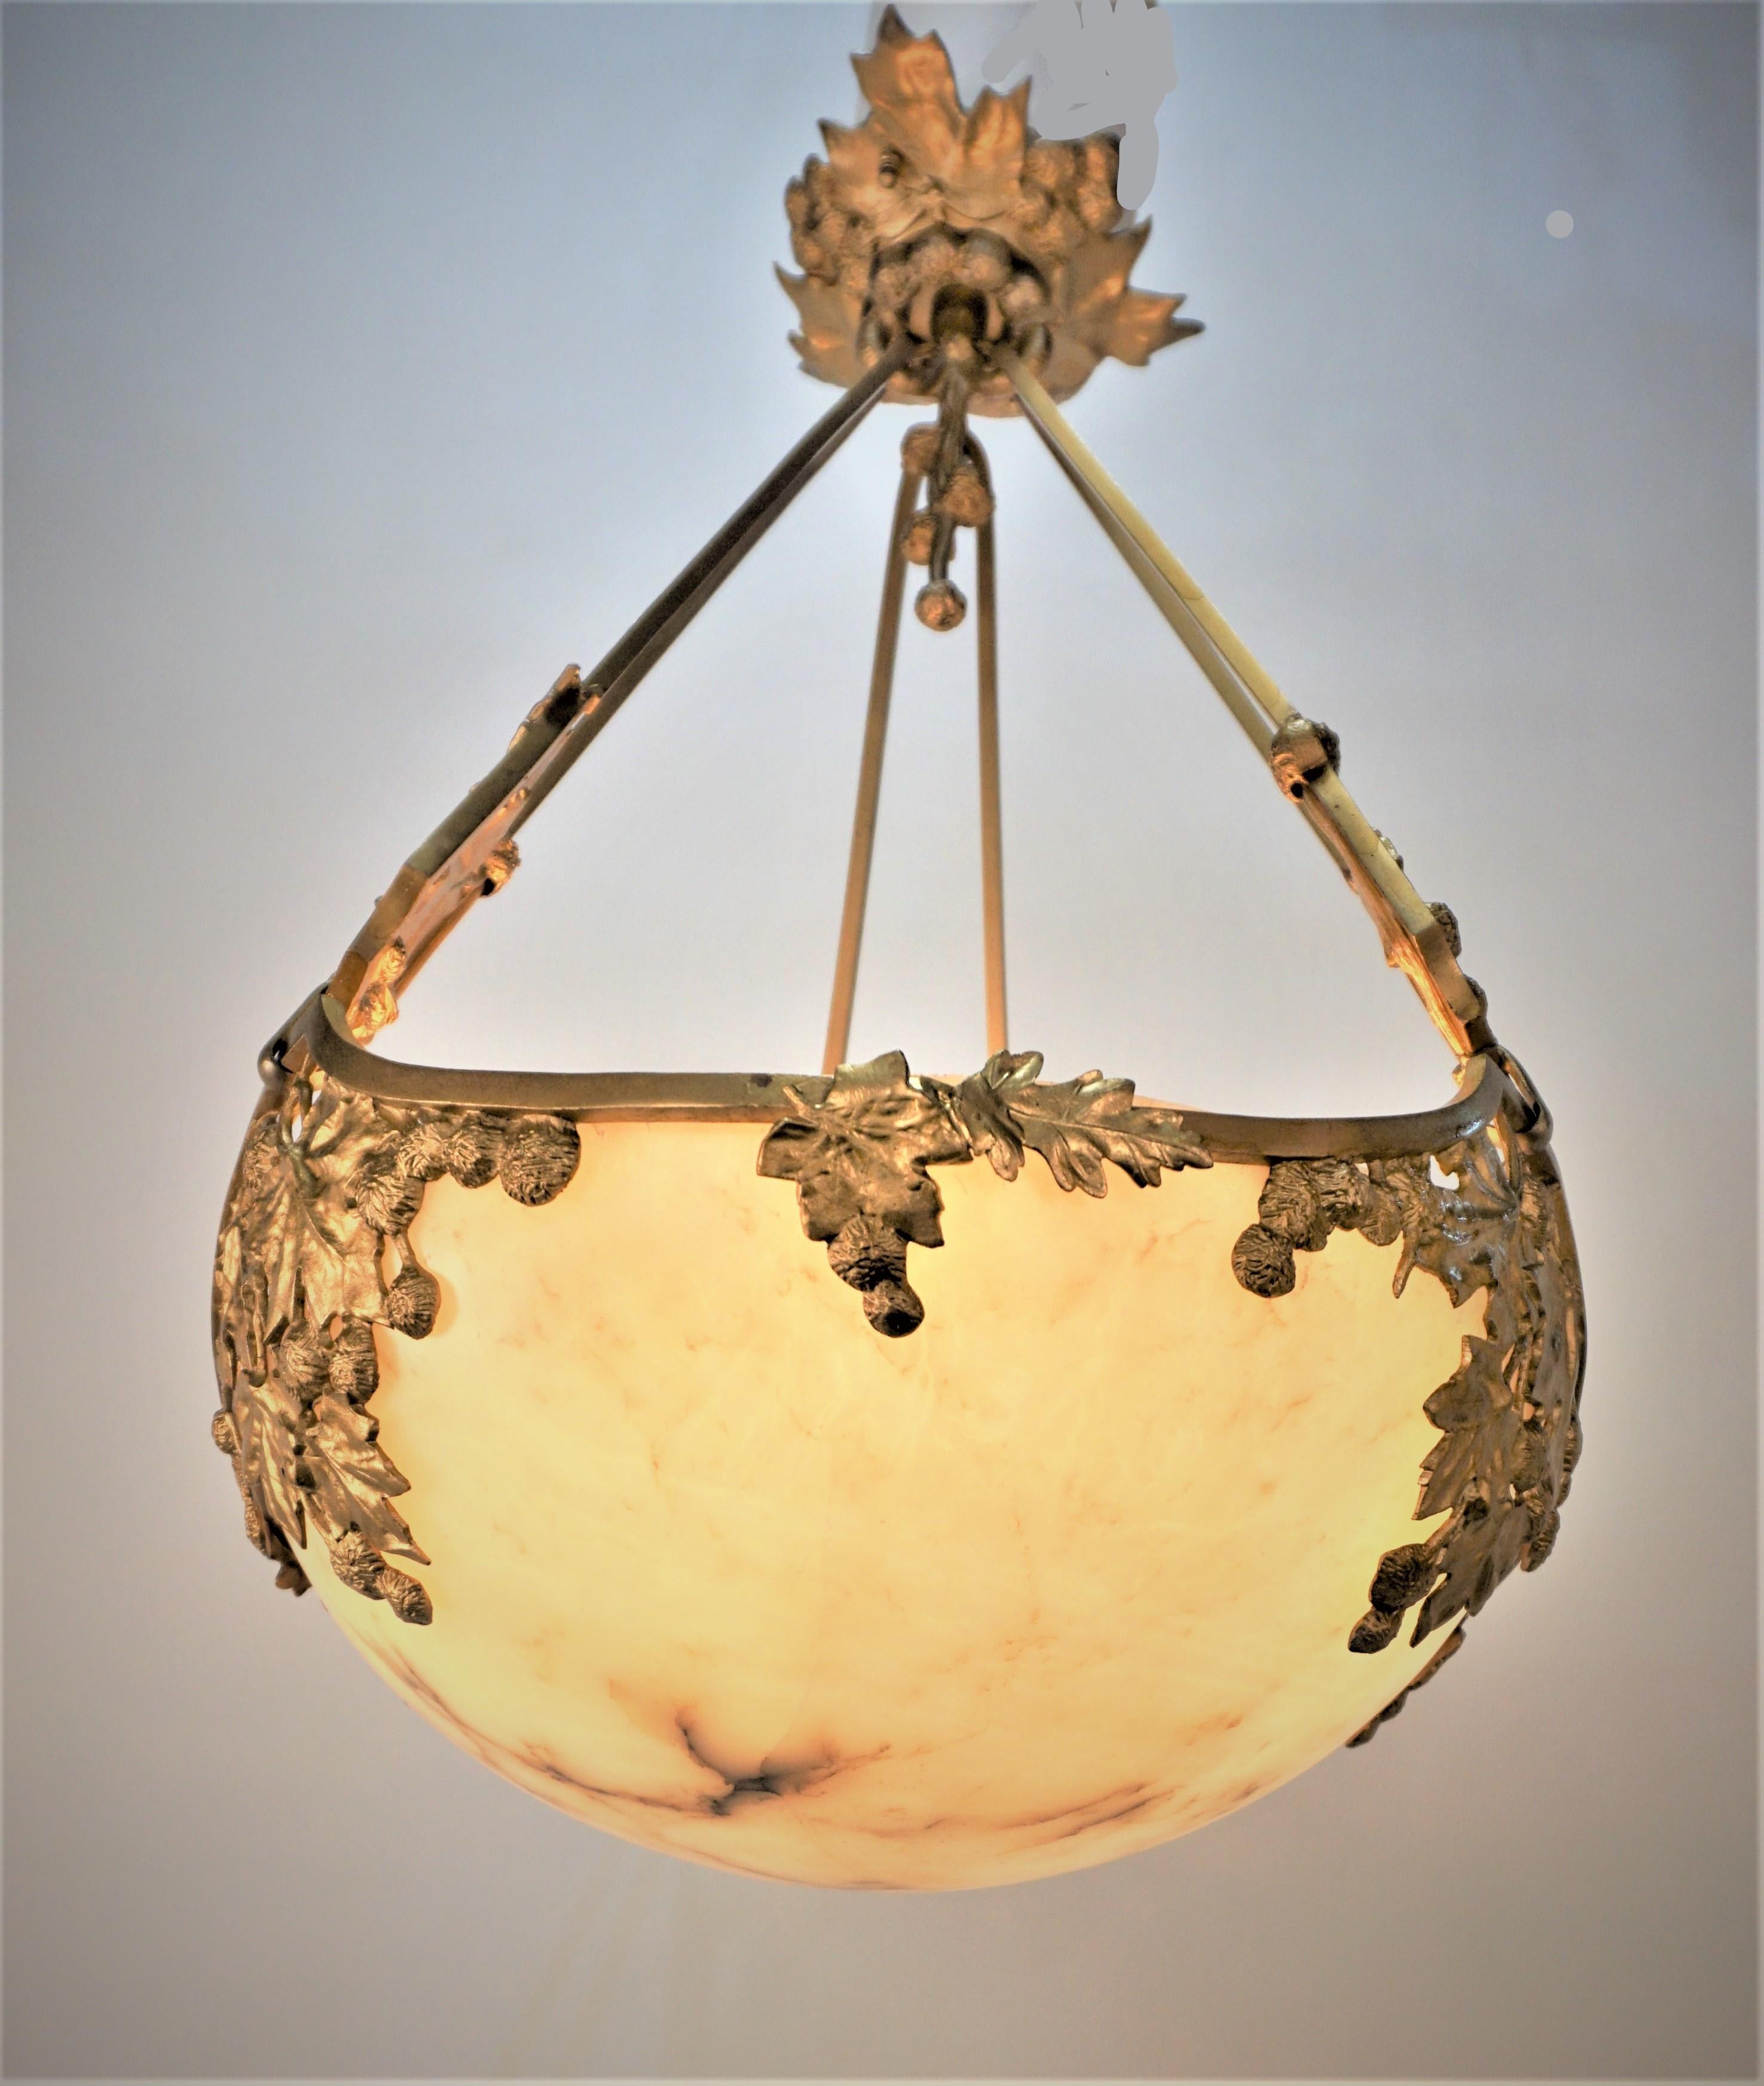 Early 20th century gilt bronze with center alabaster chandelier.
Six lights, 75watts max each.